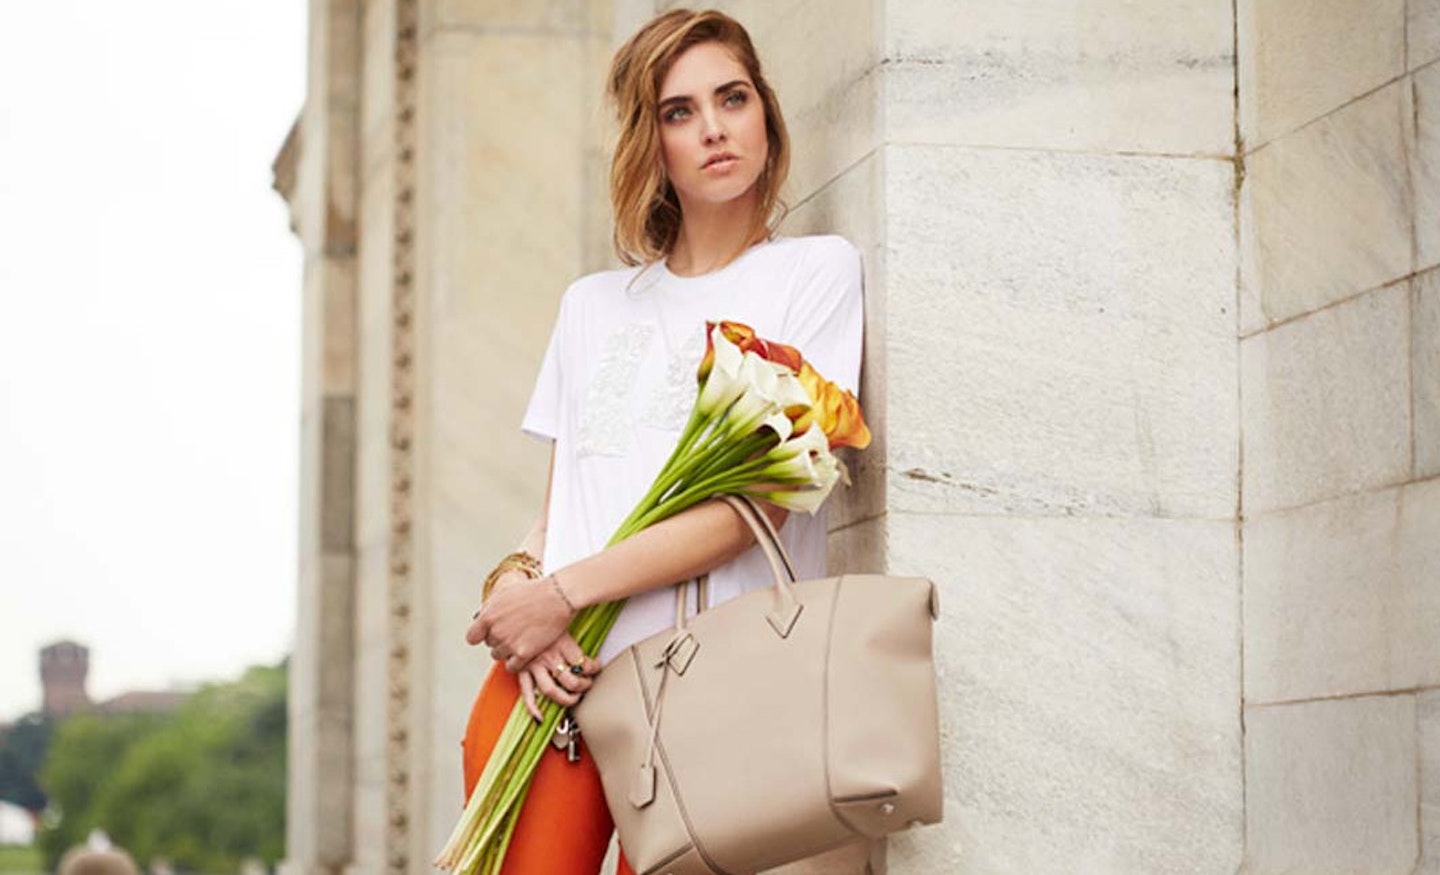 The Blonde Salad's Chiara Ferragni Launched a Shoe Line, And It's Now